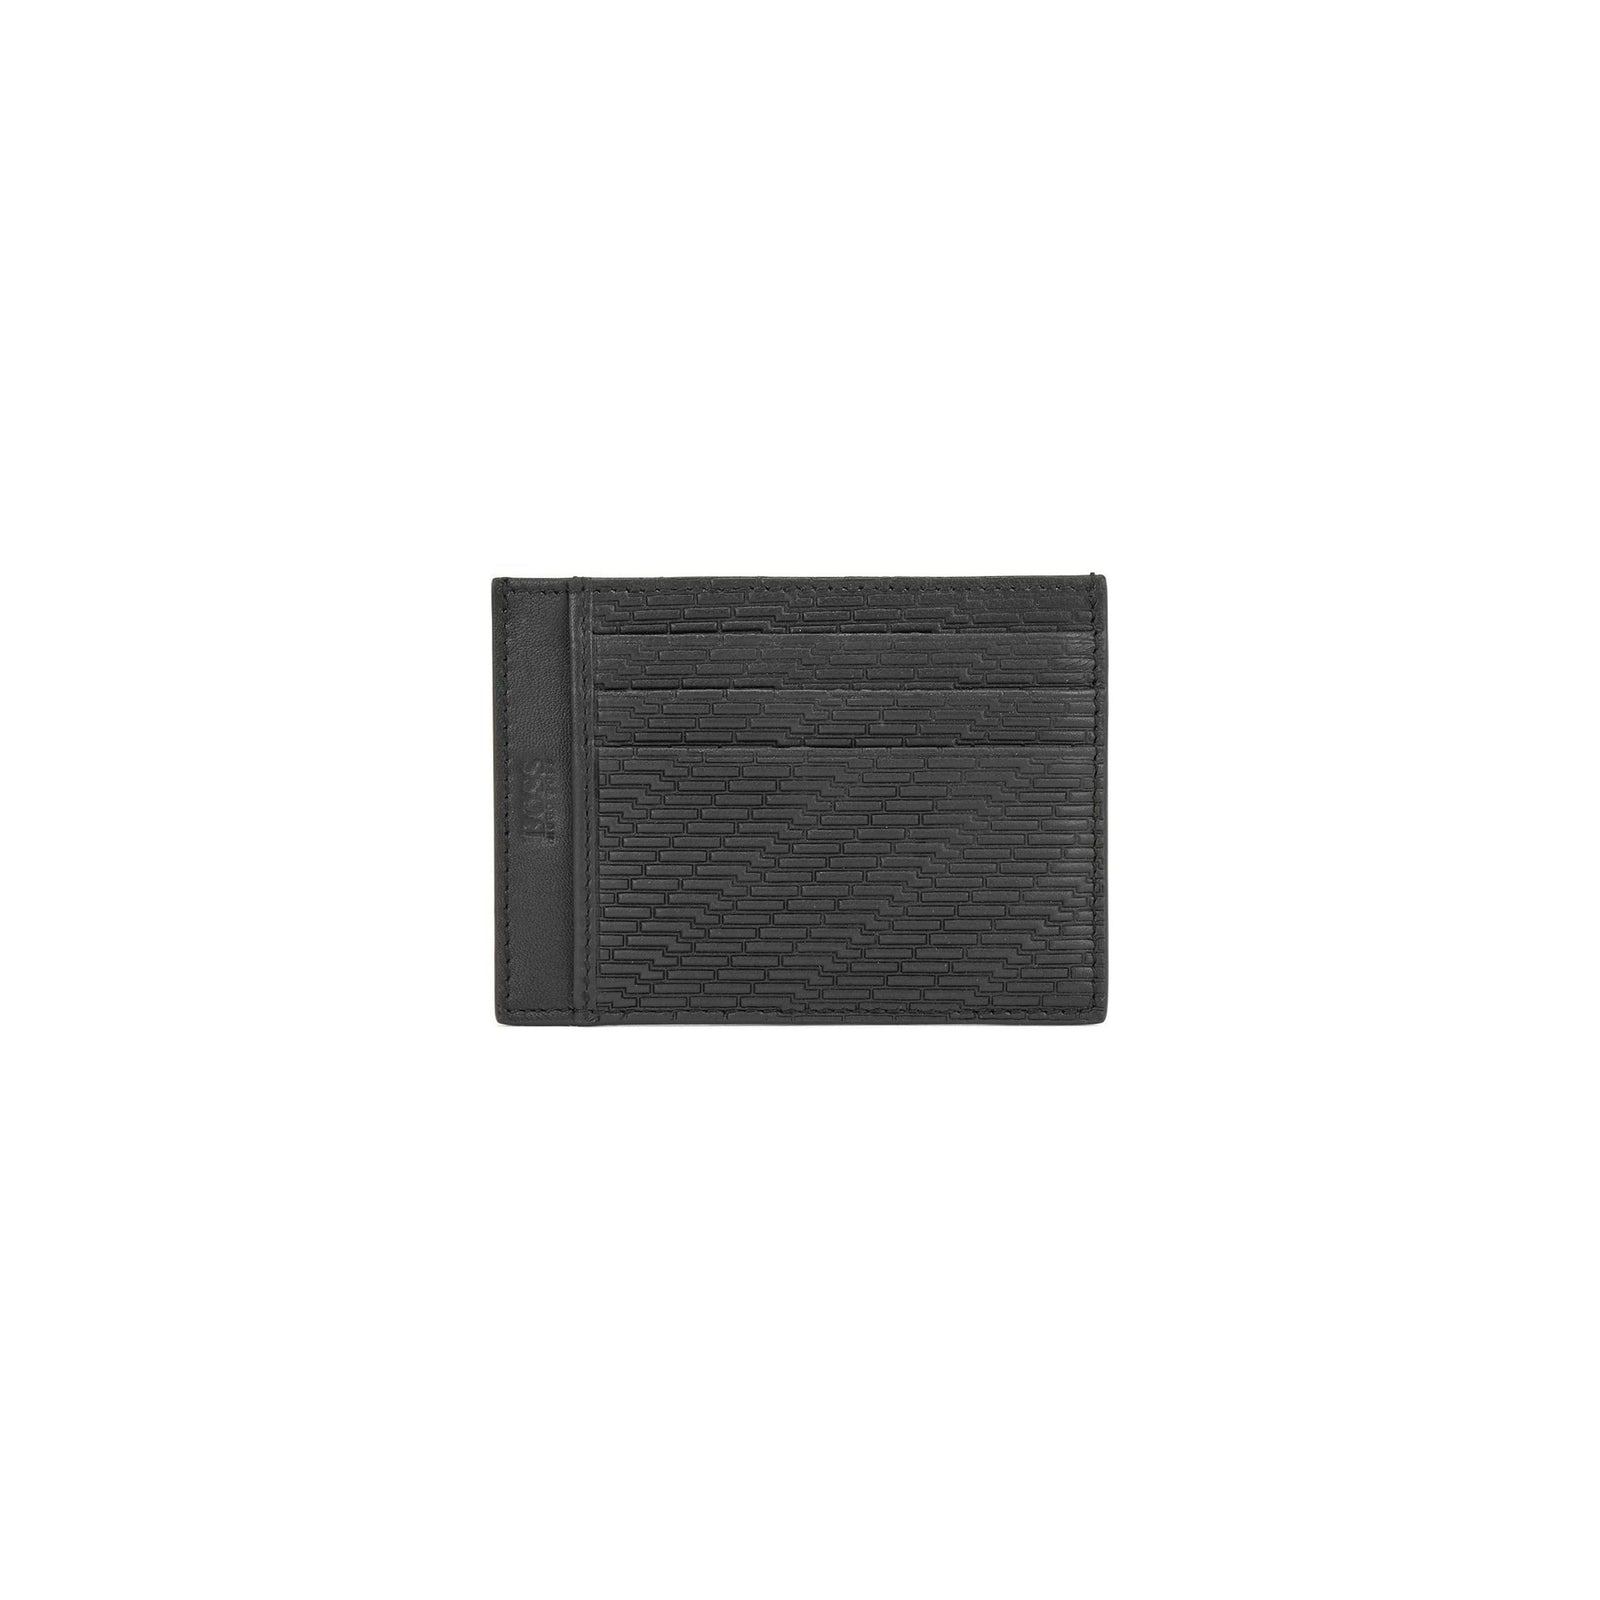 GEOMETRIC-EMBOSSED LEATHER CARD HOLDER AND KEY RING GIFT SET - Yooto